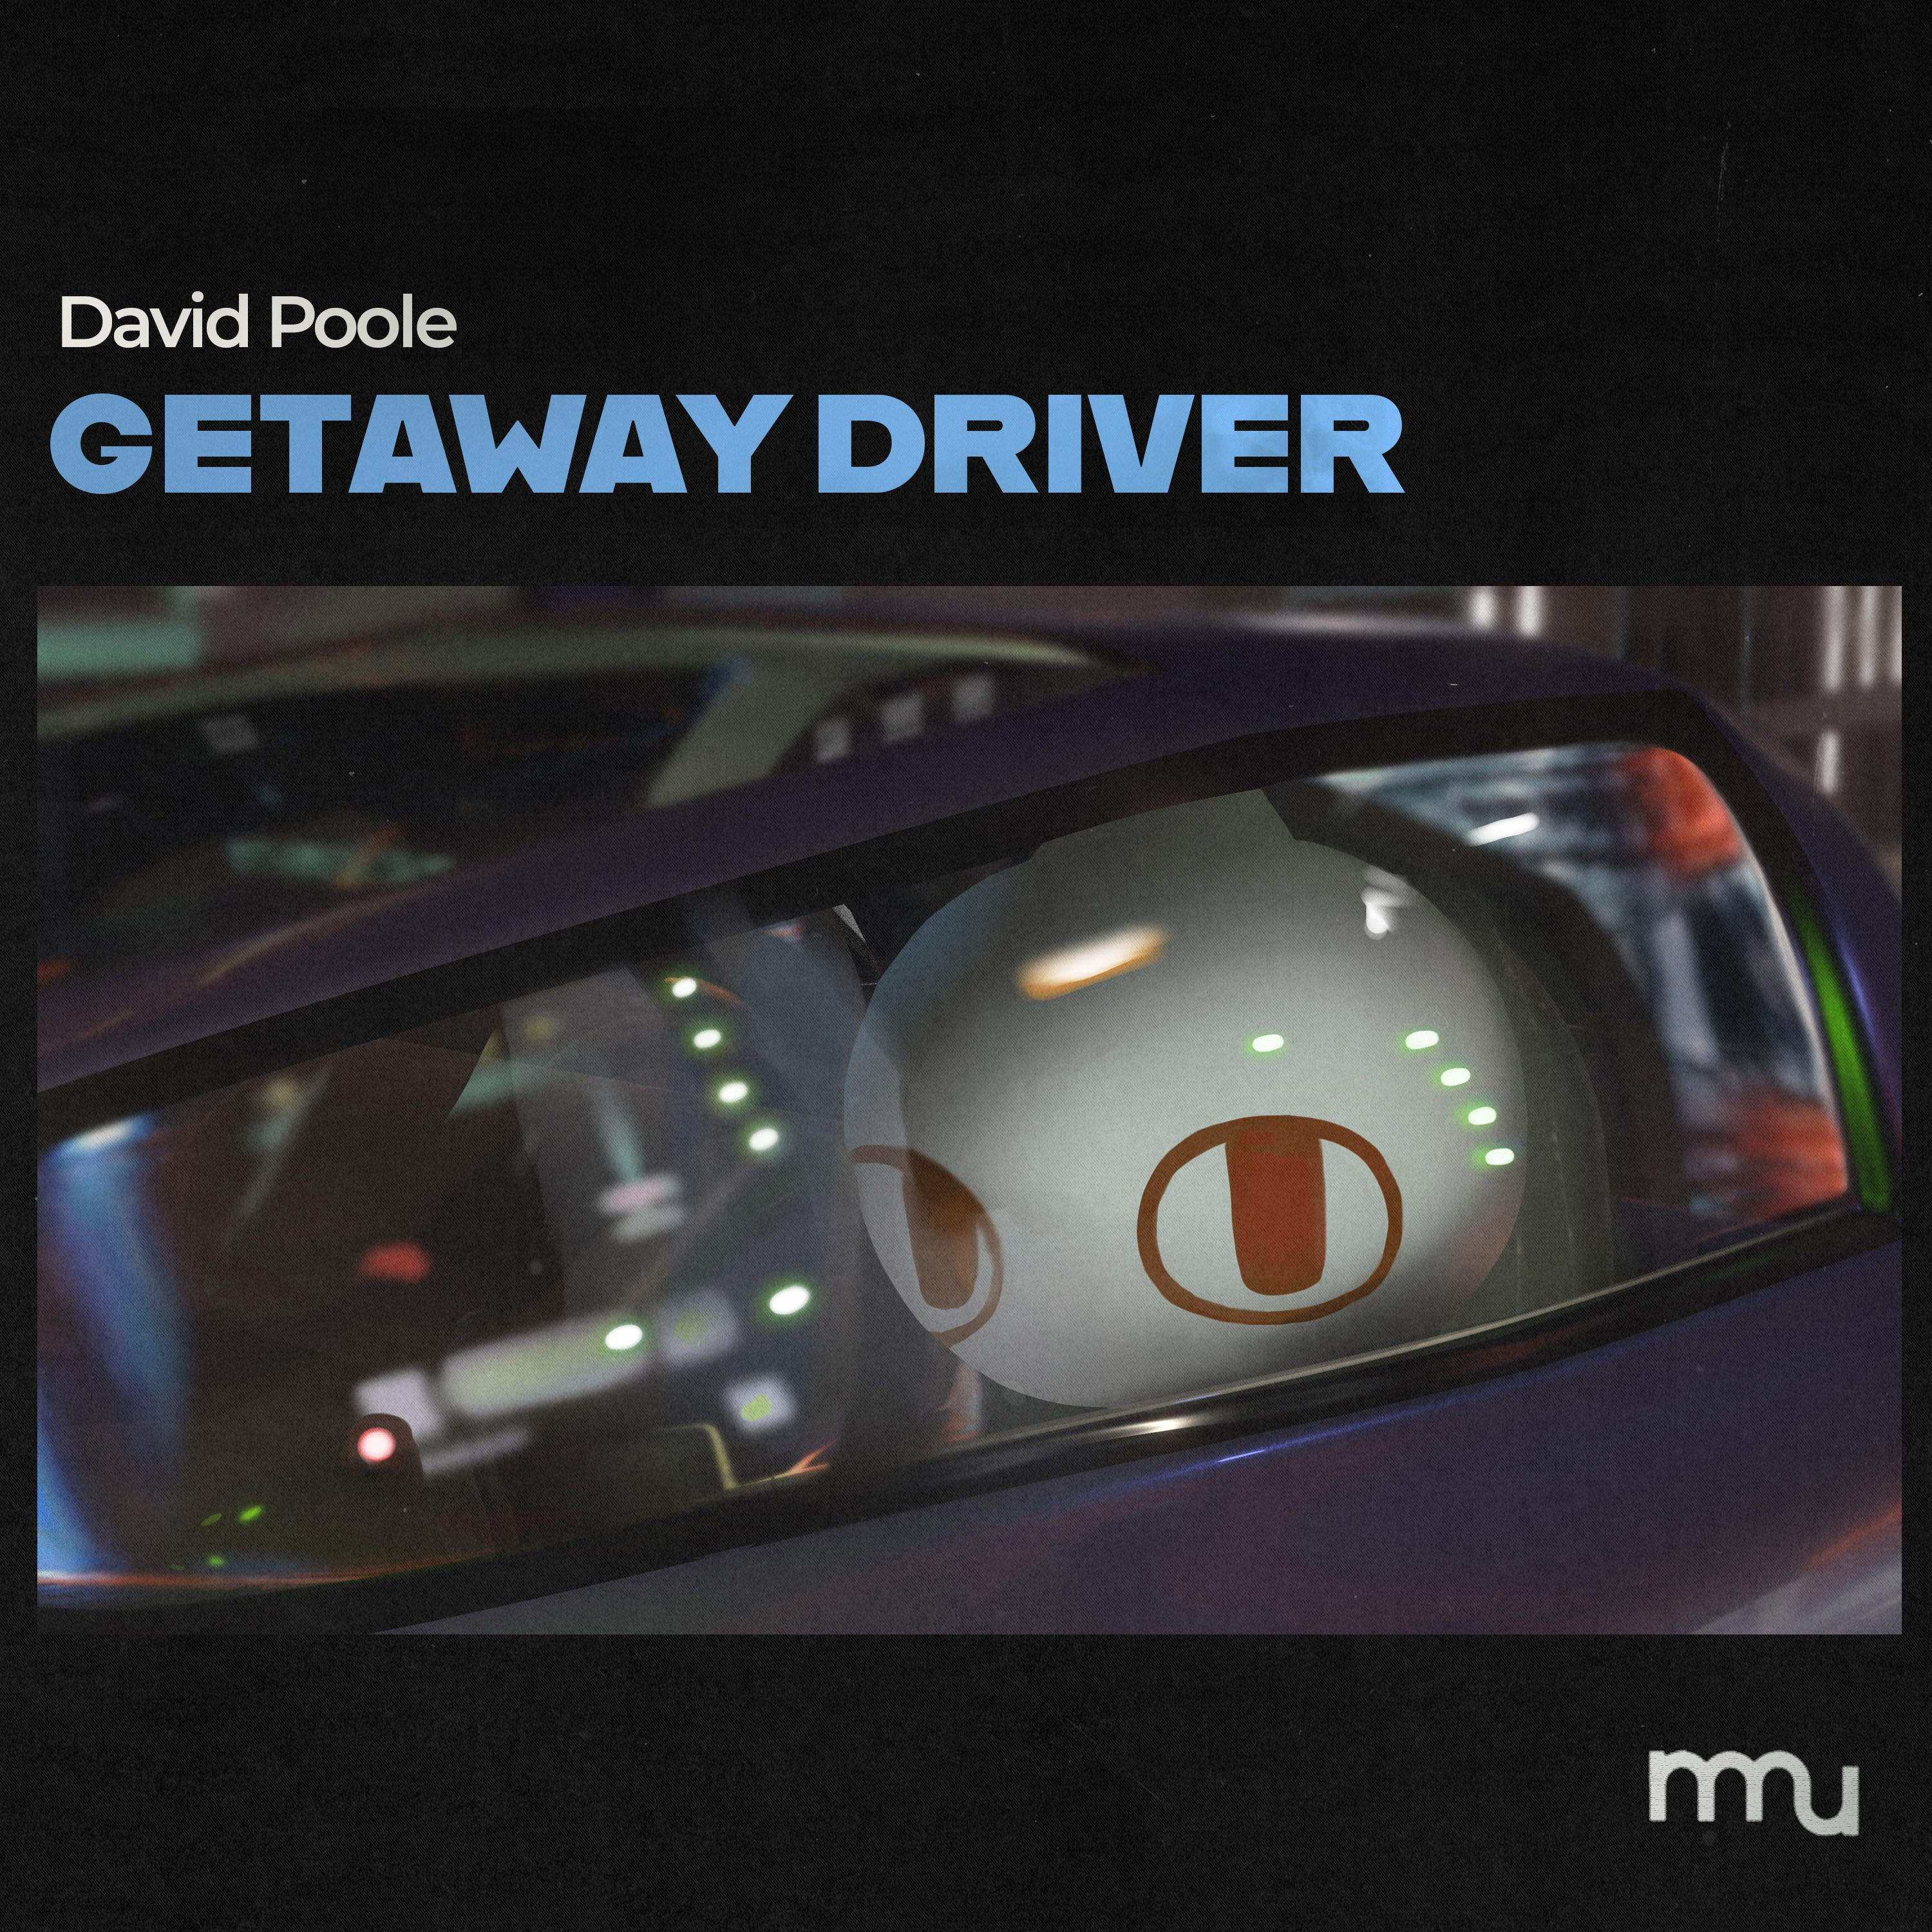 Chicago Electropop Artist David Poole Debuts Other-Worldly (literally!) “Getaway Driver” Single